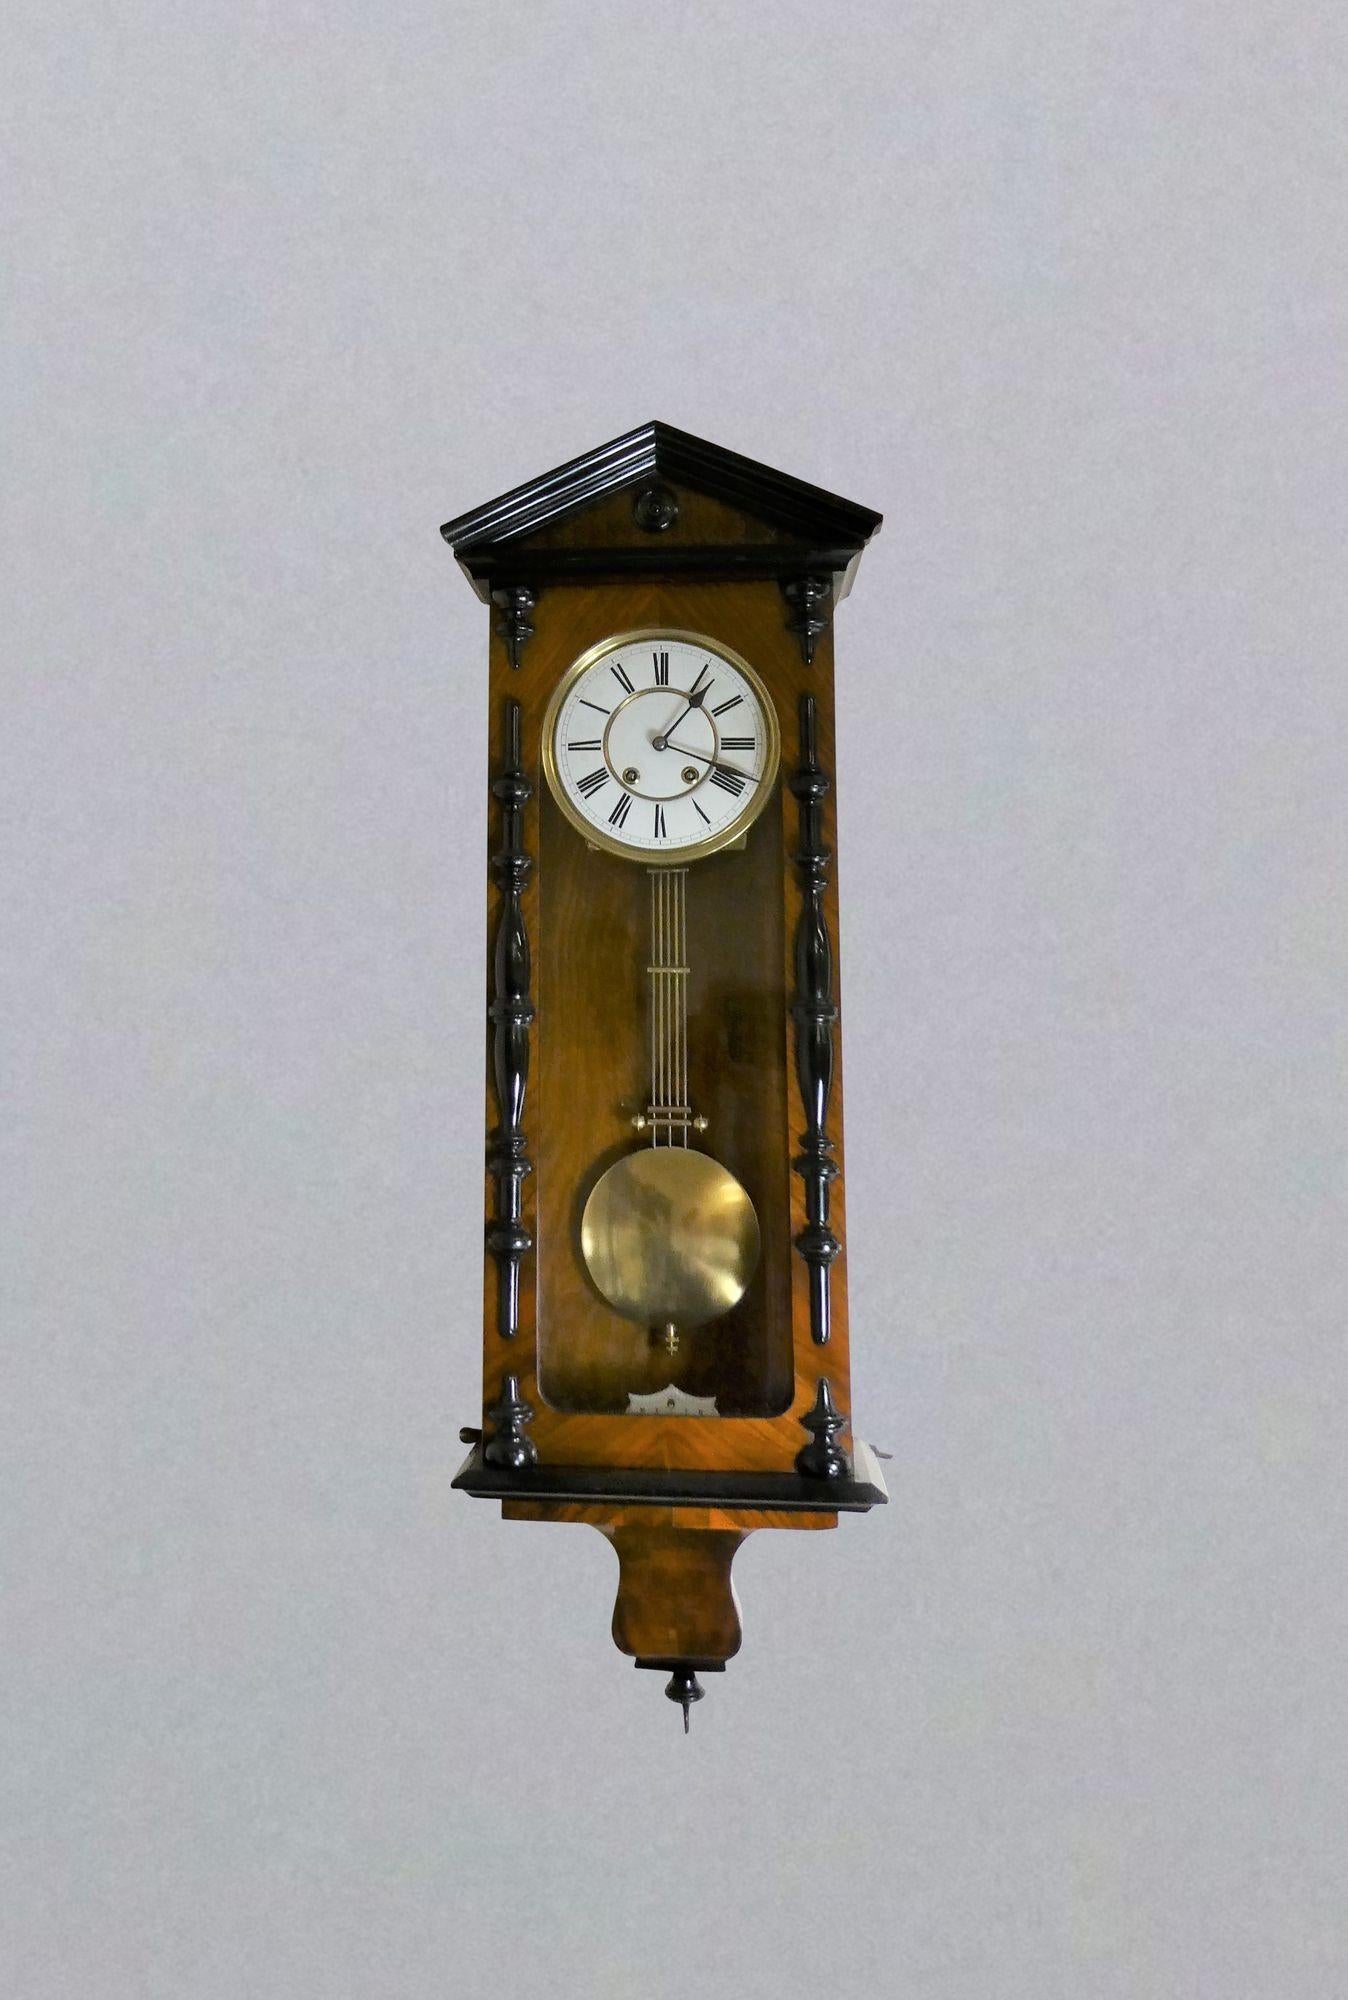 Victorian Walnut and Ebony Vienna ‘Regulator’ Wall Clock
 
Victorian Vienna ‘Regulator’ wall clock housed in a walnut case with ebony mouldings, architectural pediment and sweeping base with ebonised finial.  Original enamel beat plaque to the